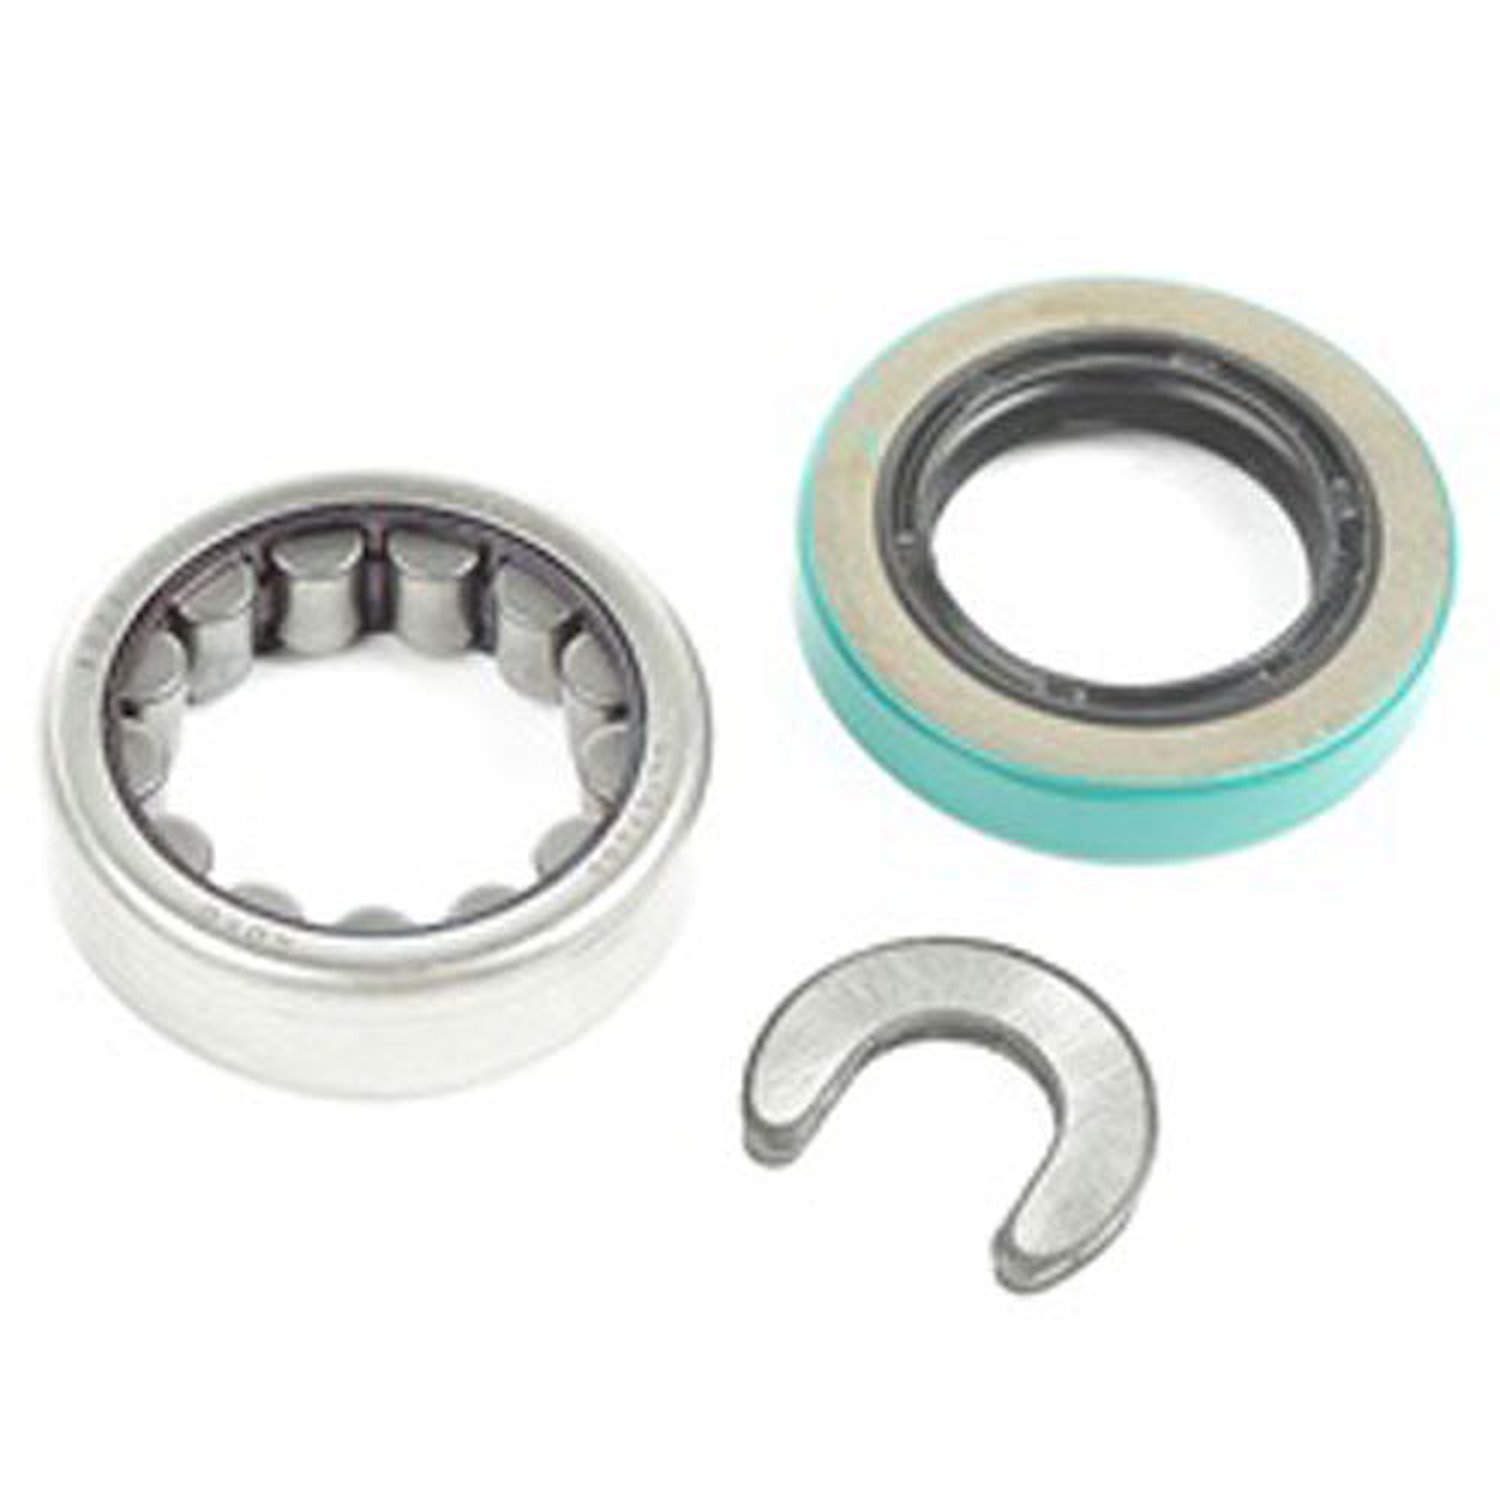 This bearing & seal kit from Omix-ADA fits 87-95 Jeep Wranglers 90-01 Cherokees and 93-98 Grand Cher